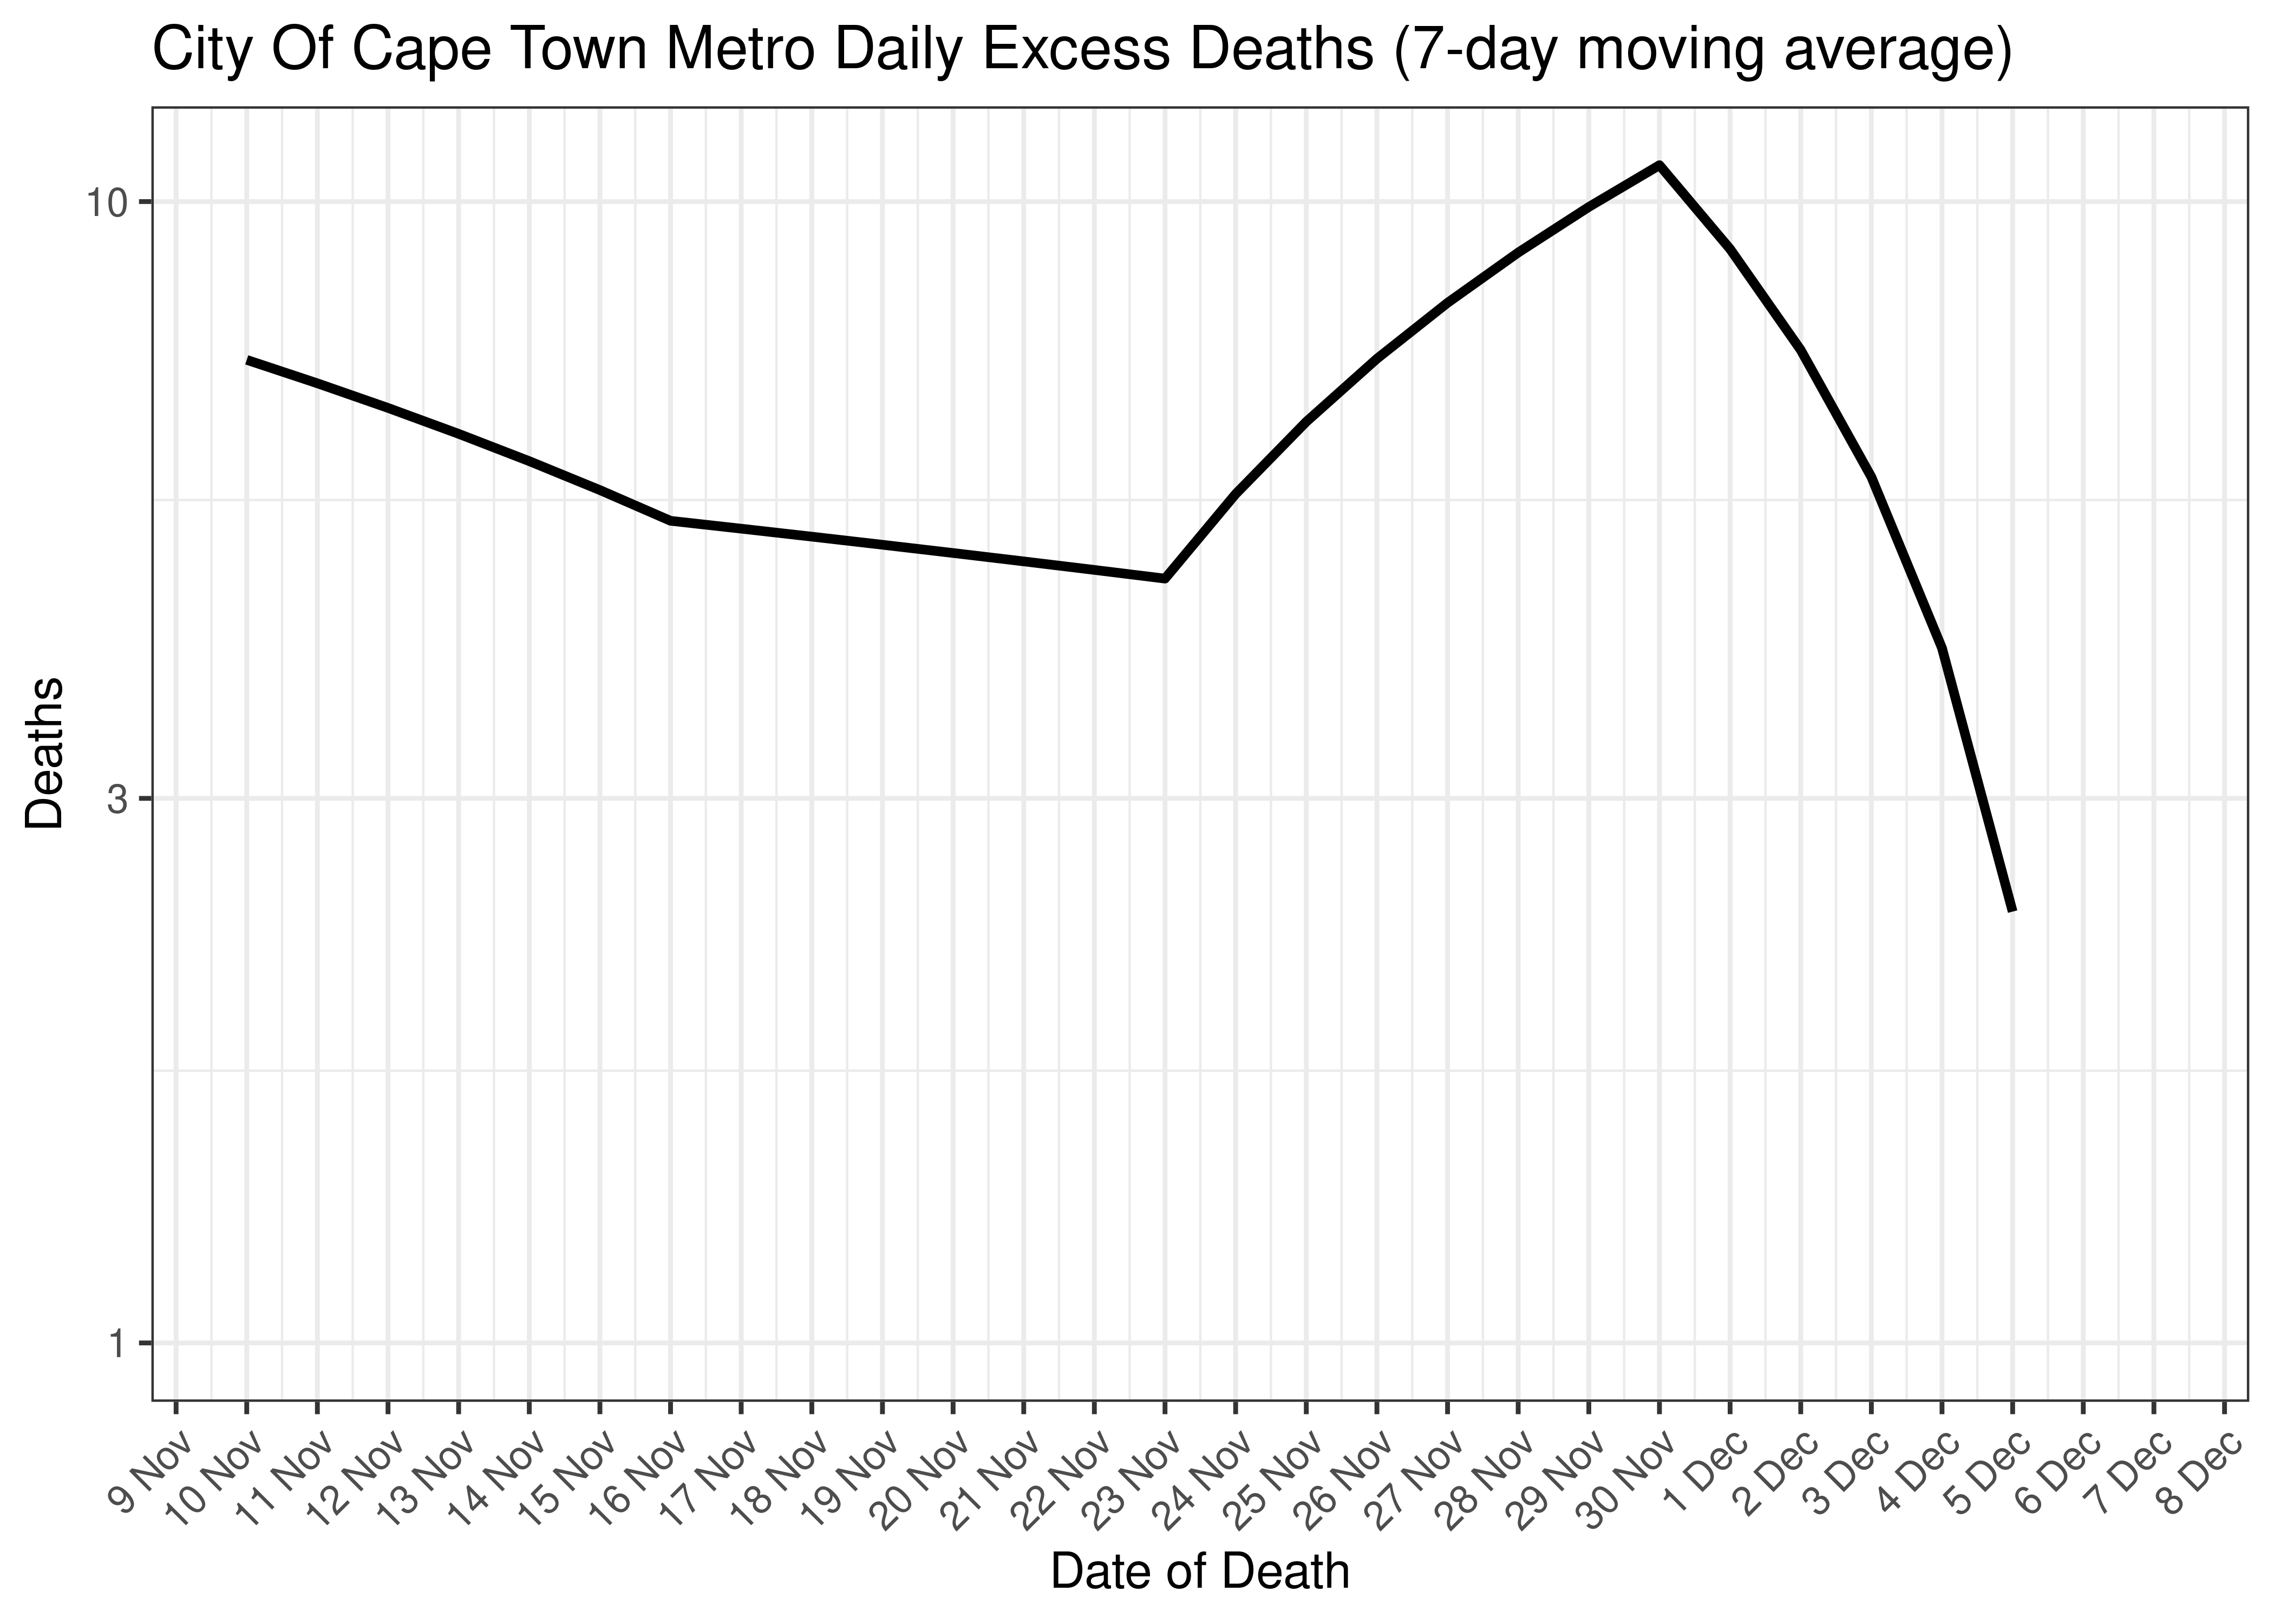 City Of Cape Town Metro Excess Deaths for Last 30-days (7-day moving average)